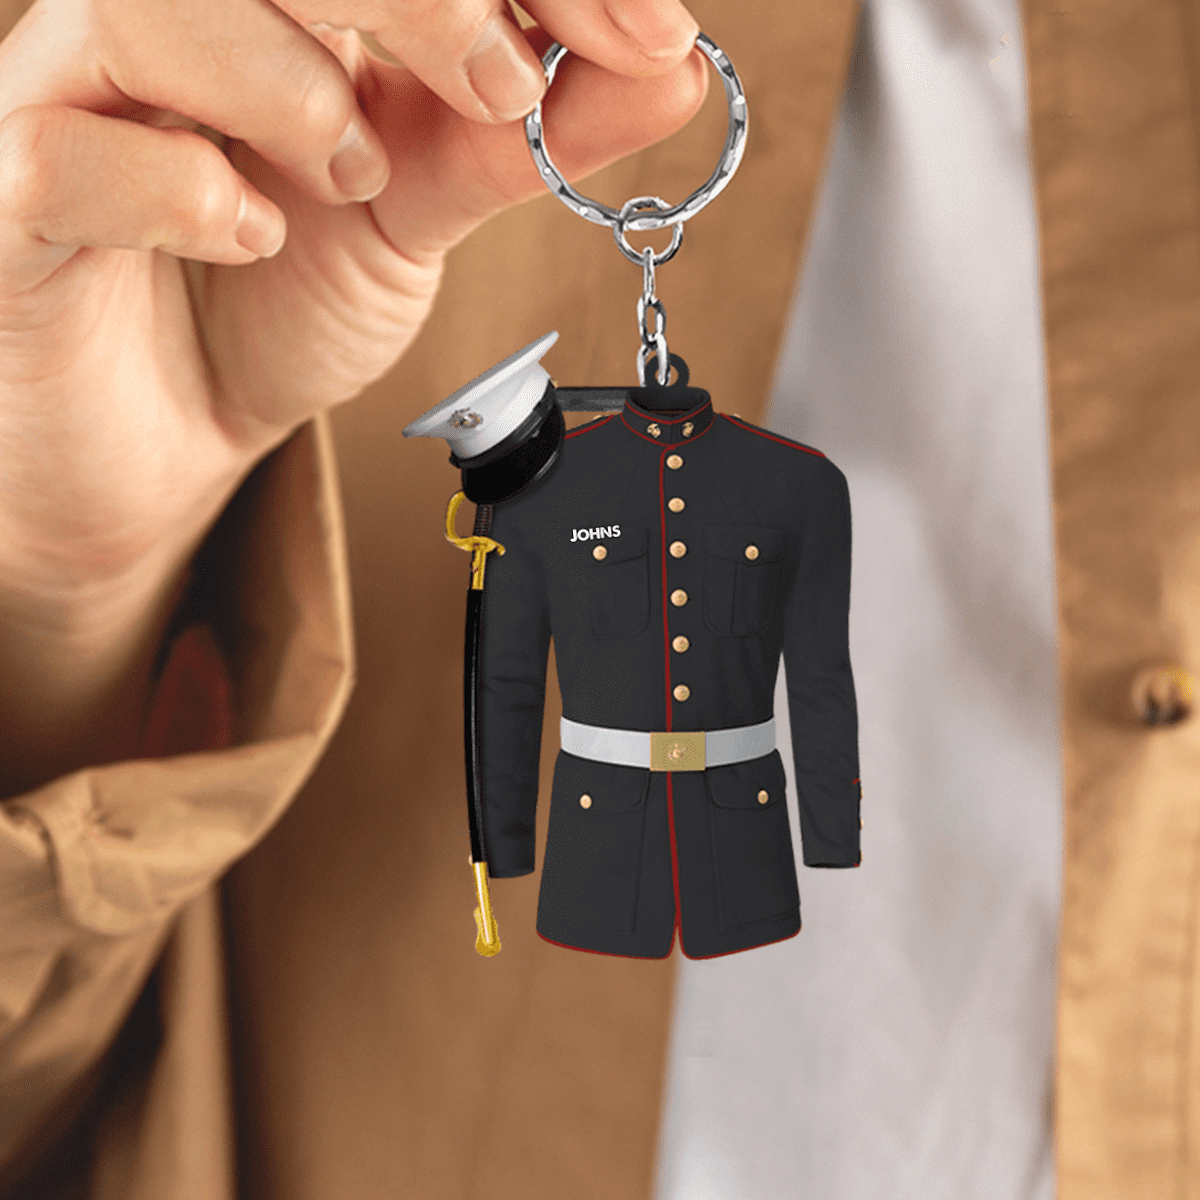 Personalized Military Uniform Keychain - Custom Name Acrylic Military Keychain for Officer/ Soldiers